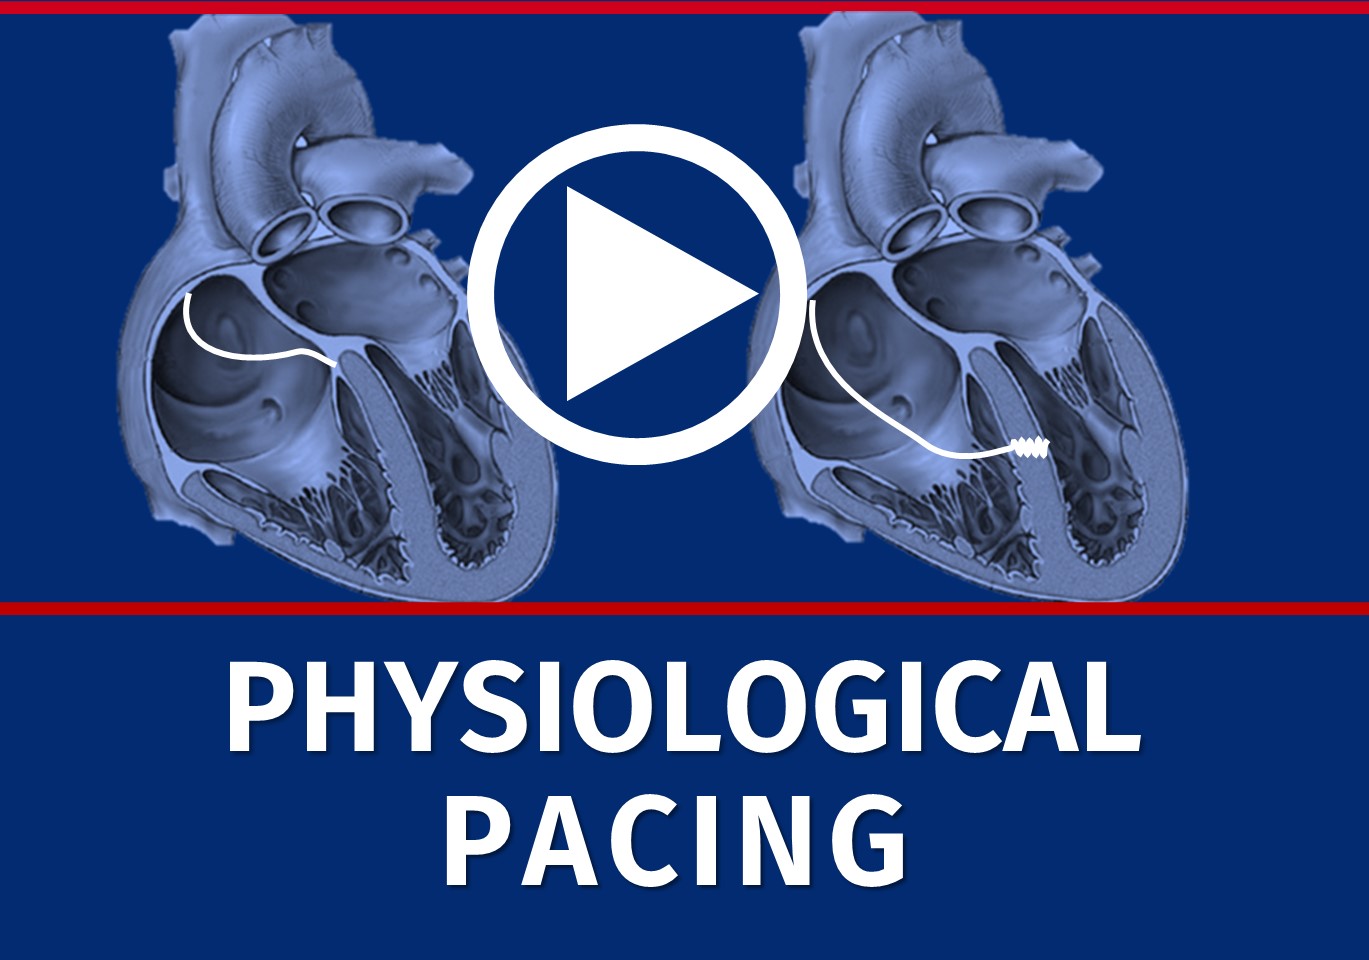 7. Physiological Pacing MicroPort Academy